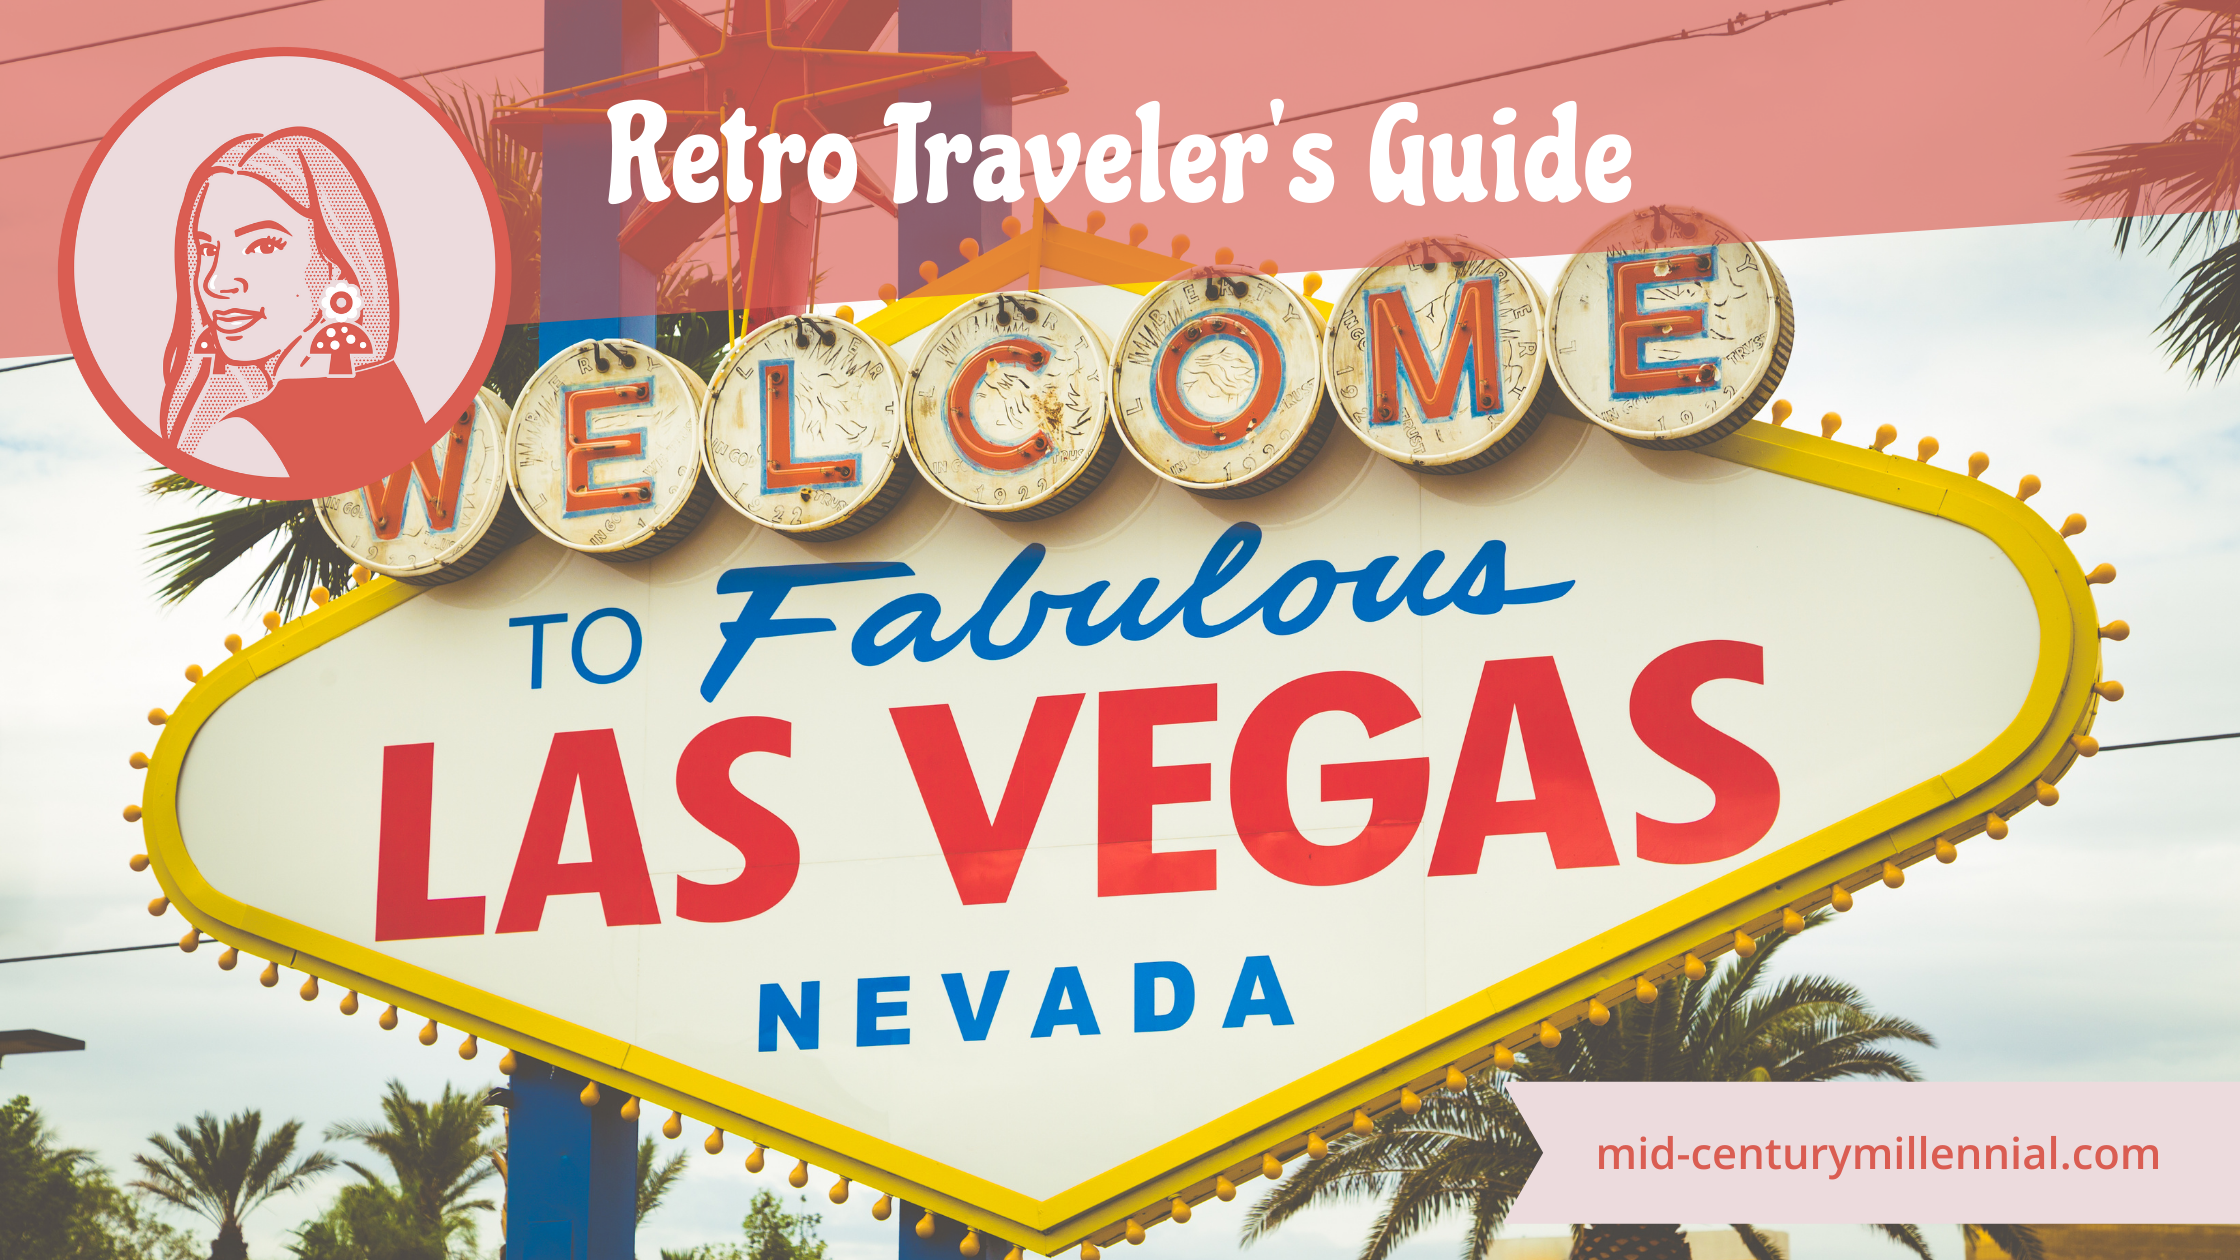 Las Vegas Hotels, Shows, Things to Do, Restaurants & Maps